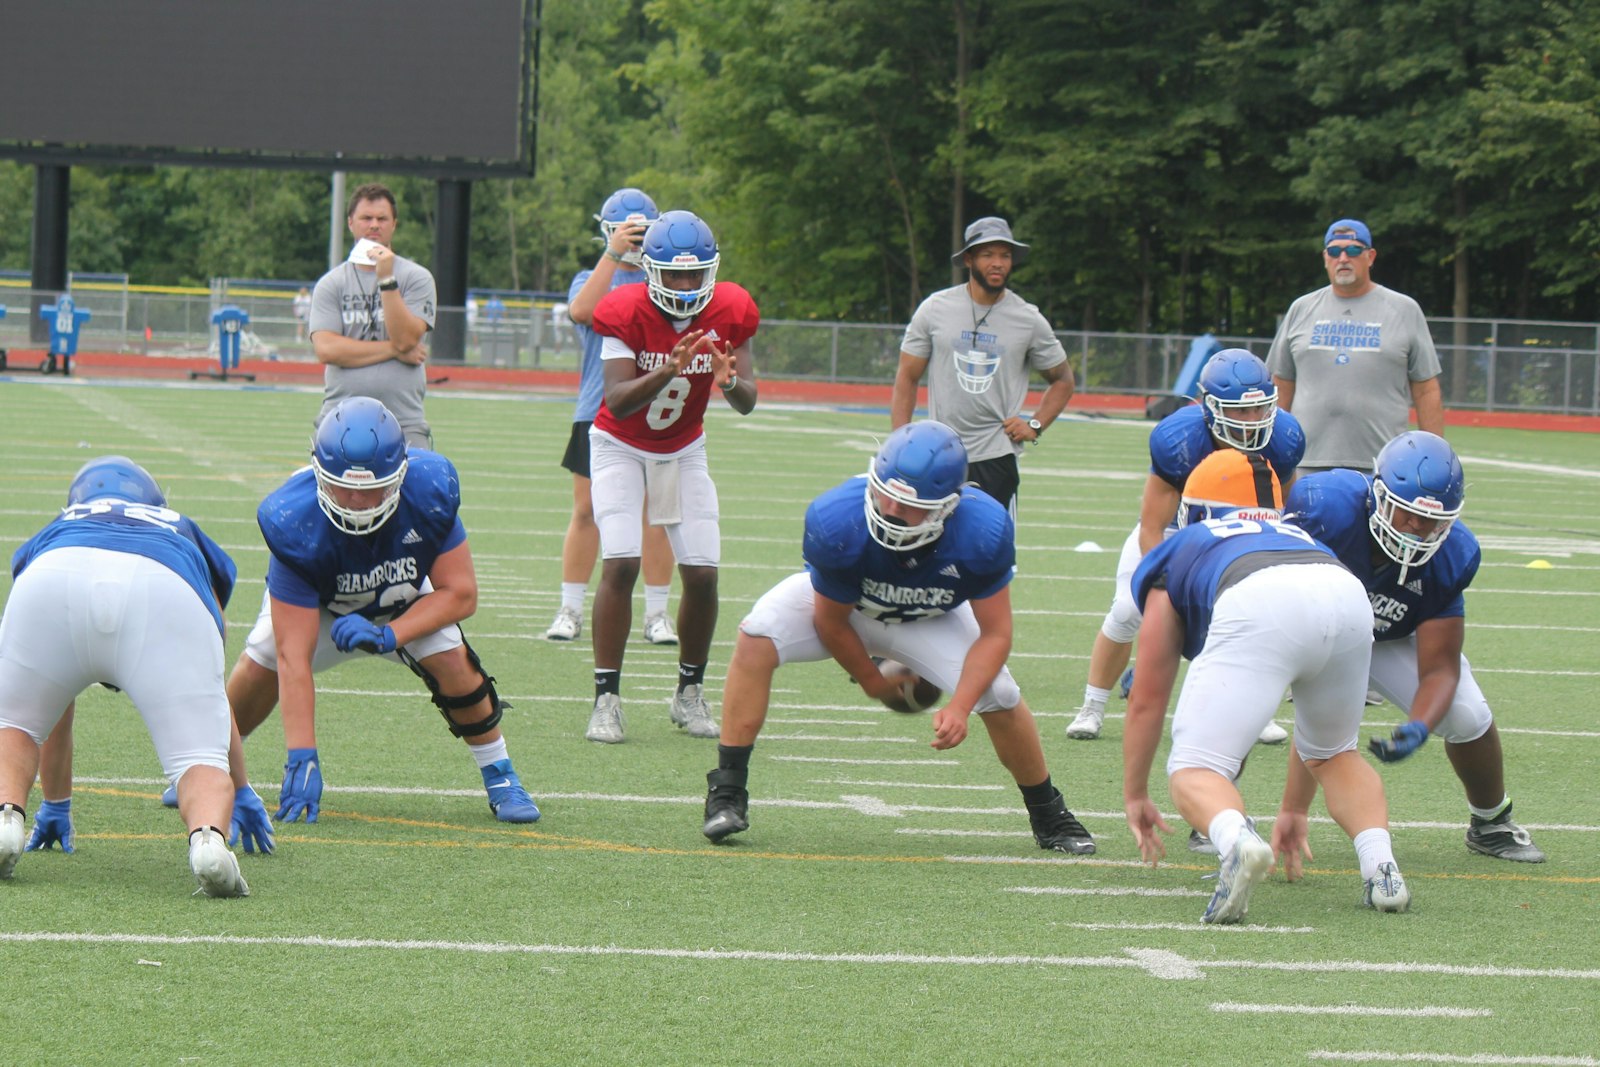 Quarterback Beau Jackson awaits the snap as Catholic Central practices its red-zone offense during the first week of the pre-season.